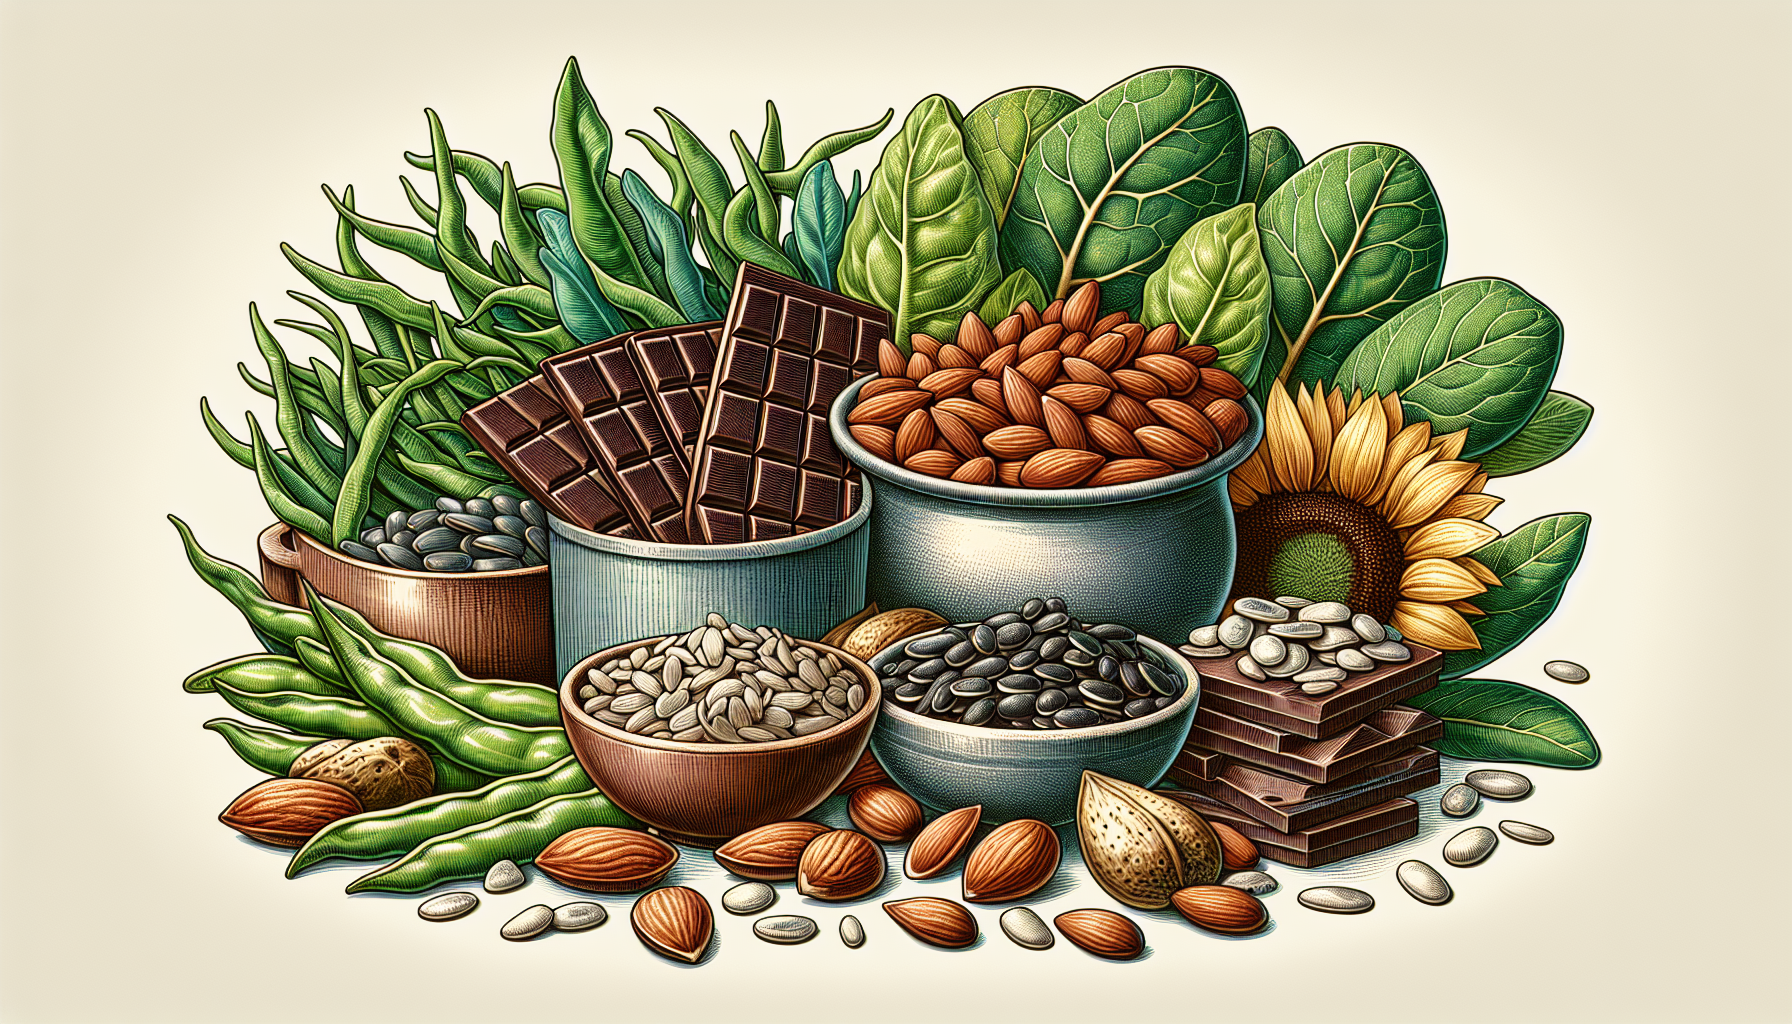 Illustration of a balanced diet with magnesium-rich foods